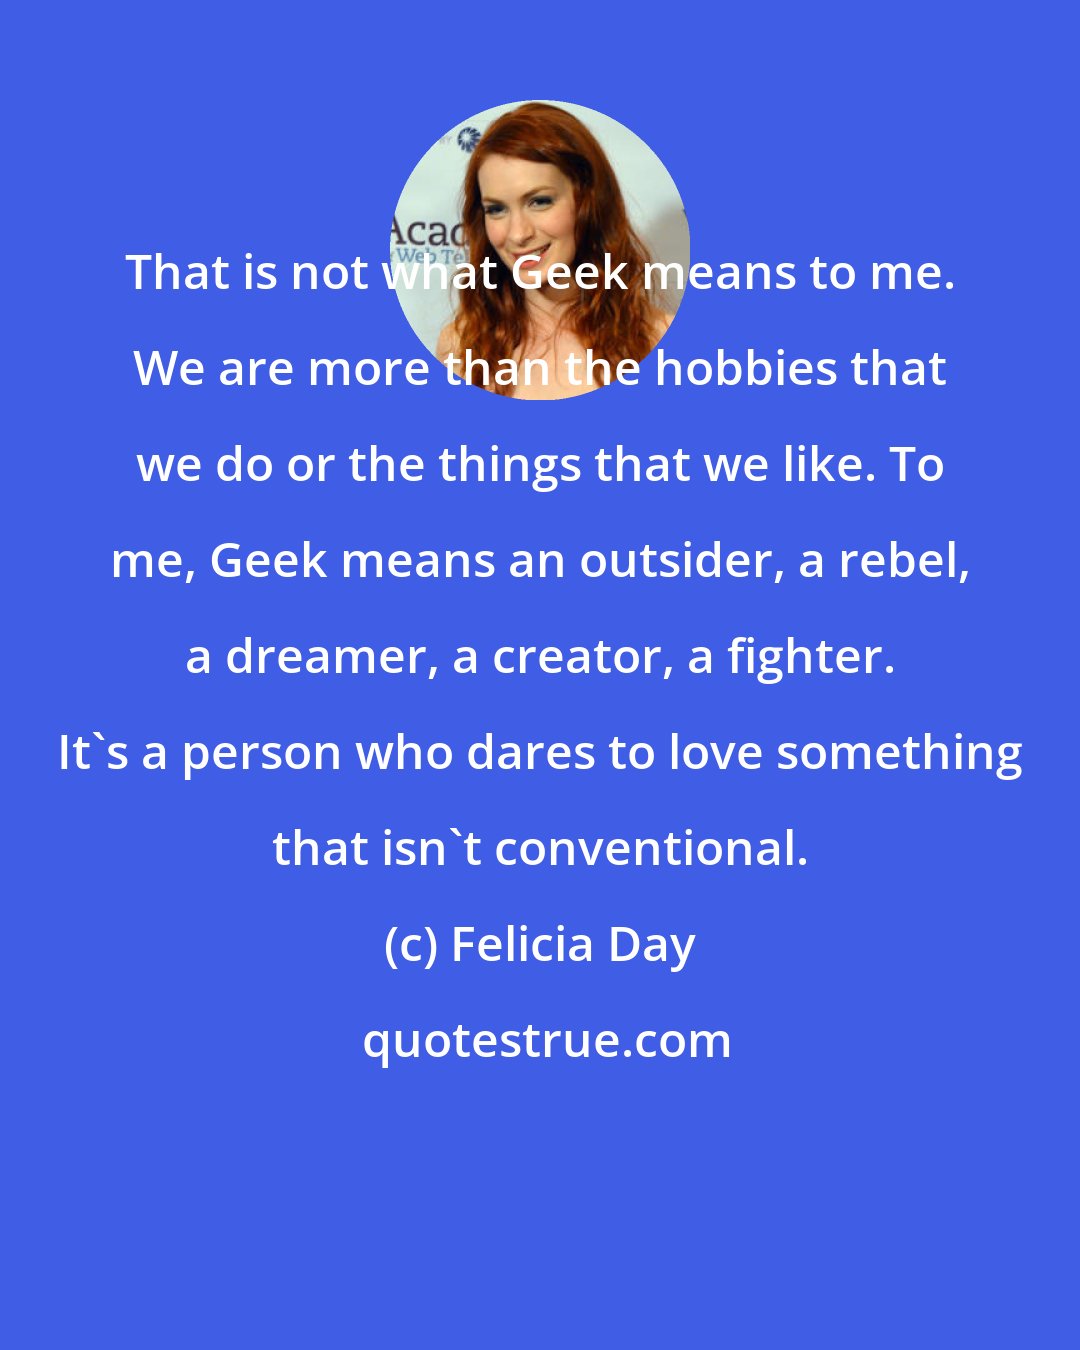 Felicia Day: That is not what Geek means to me. We are more than the hobbies that we do or the things that we like. To me, Geek means an outsider, a rebel, a dreamer, a creator, a fighter. It's a person who dares to love something that isn't conventional.